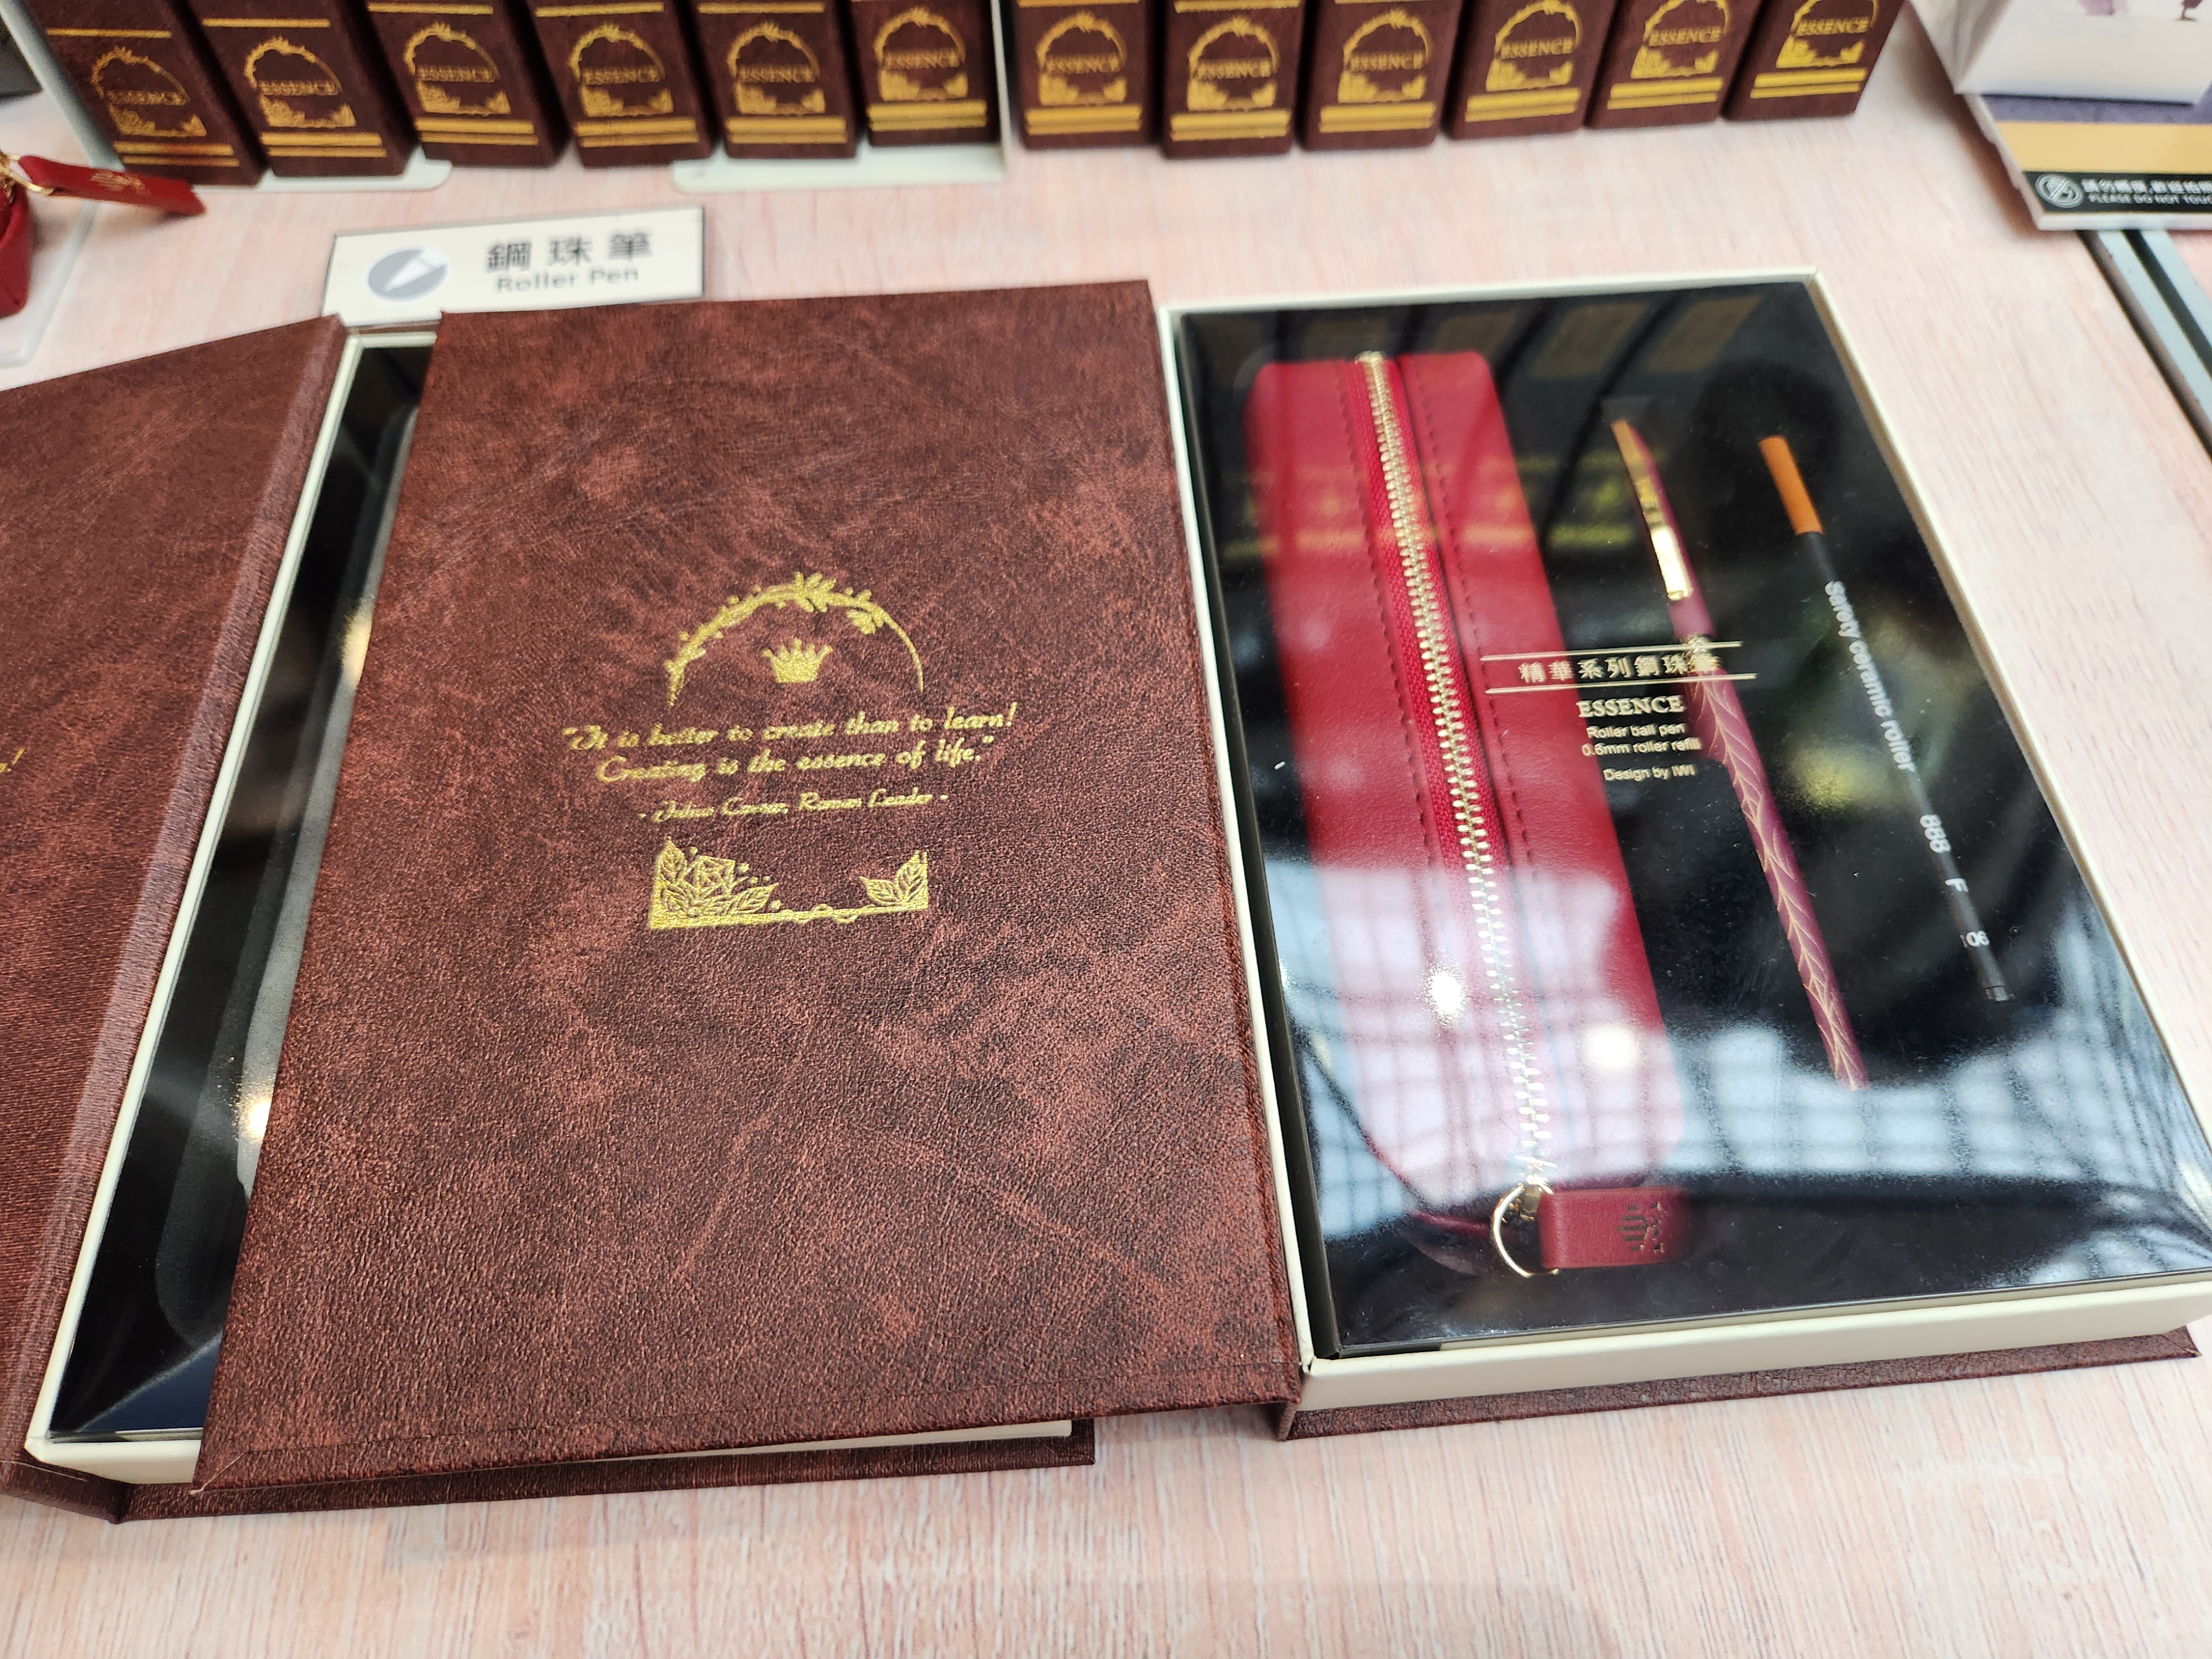 An IWI pen, refill and case sold in a book-shaped box. Cute.